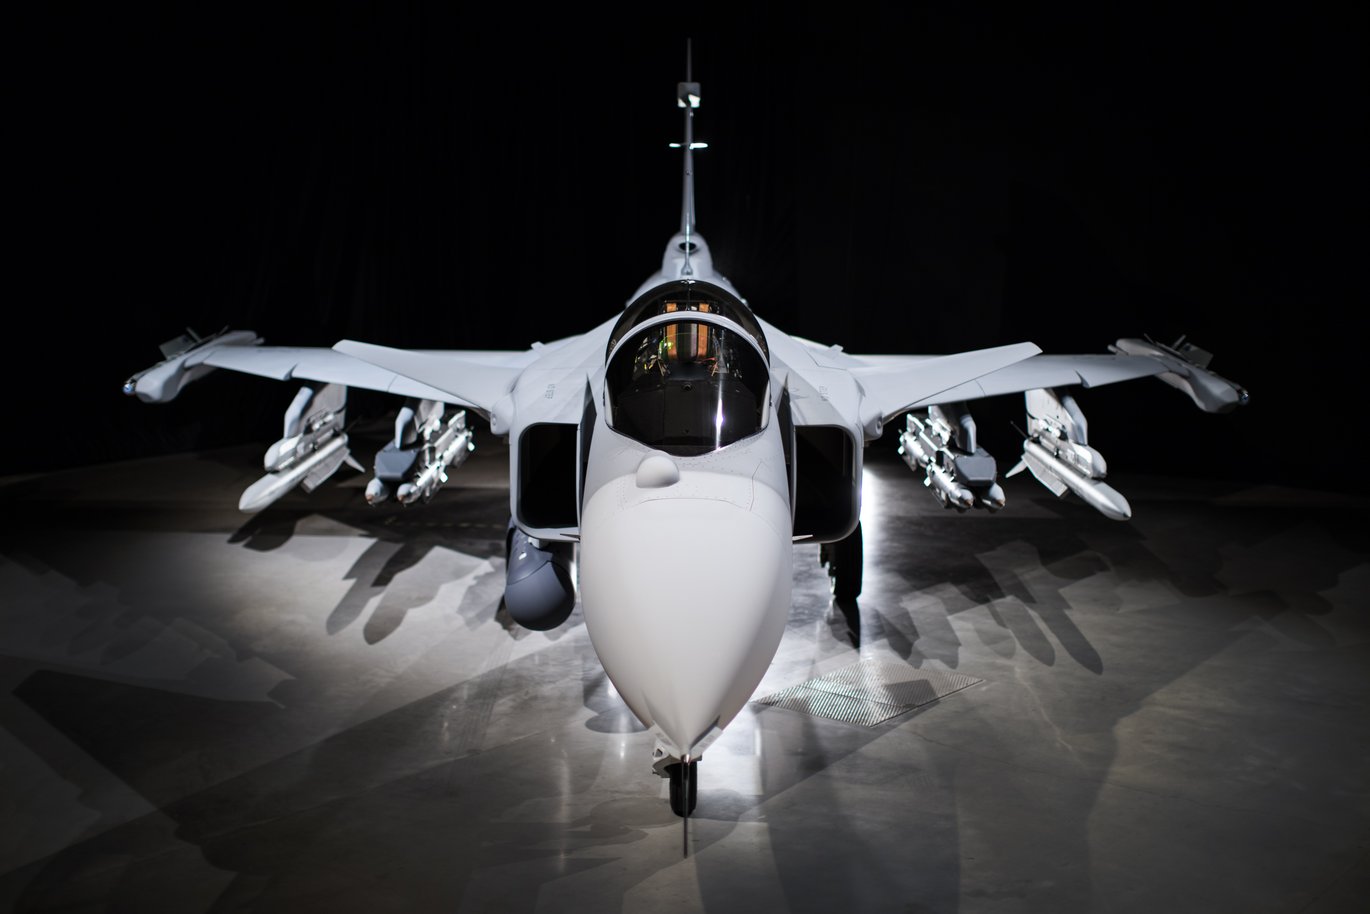 The Saab Gripen E-series fighter jet in the Swedish Air Force livery.